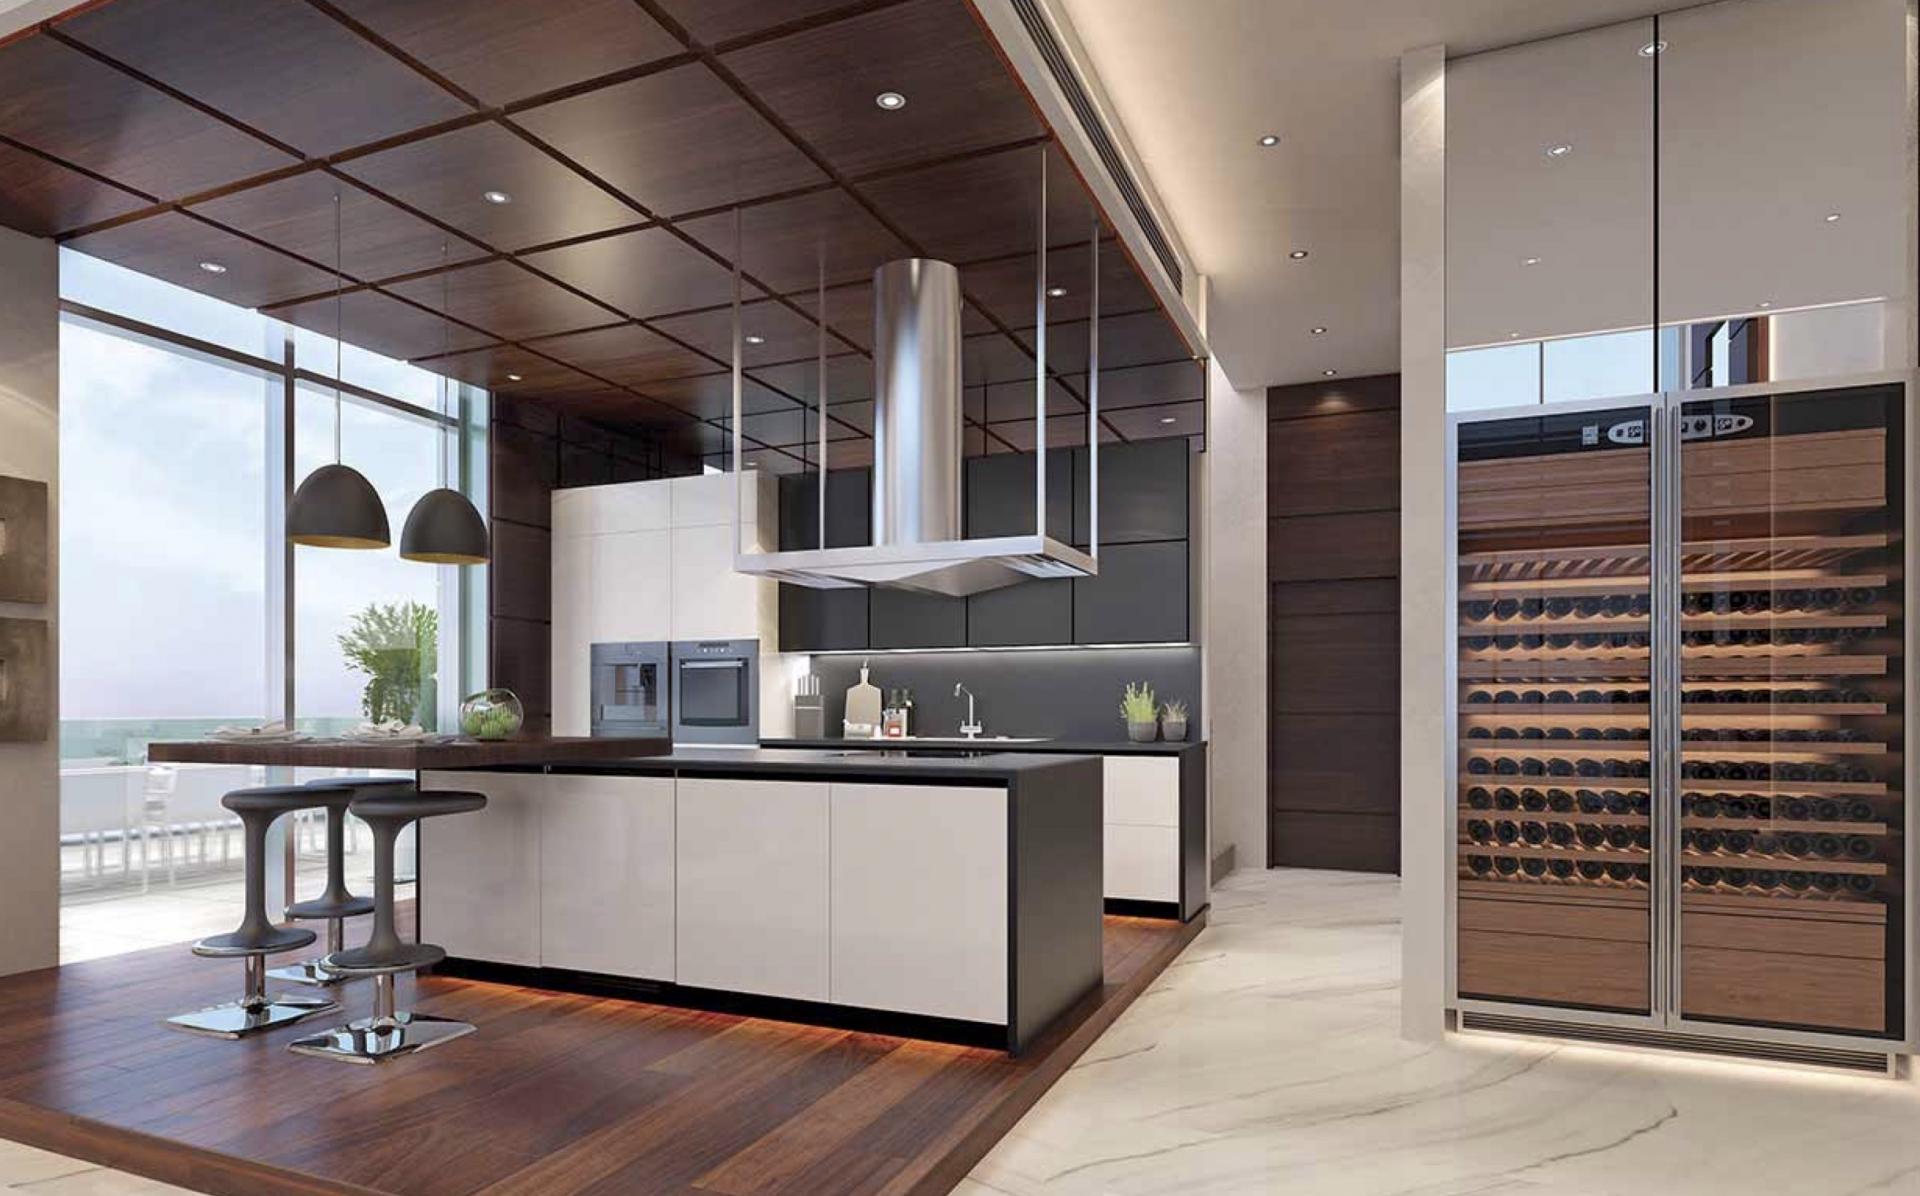 Top 10 contemporary kitchens from around the world Blog